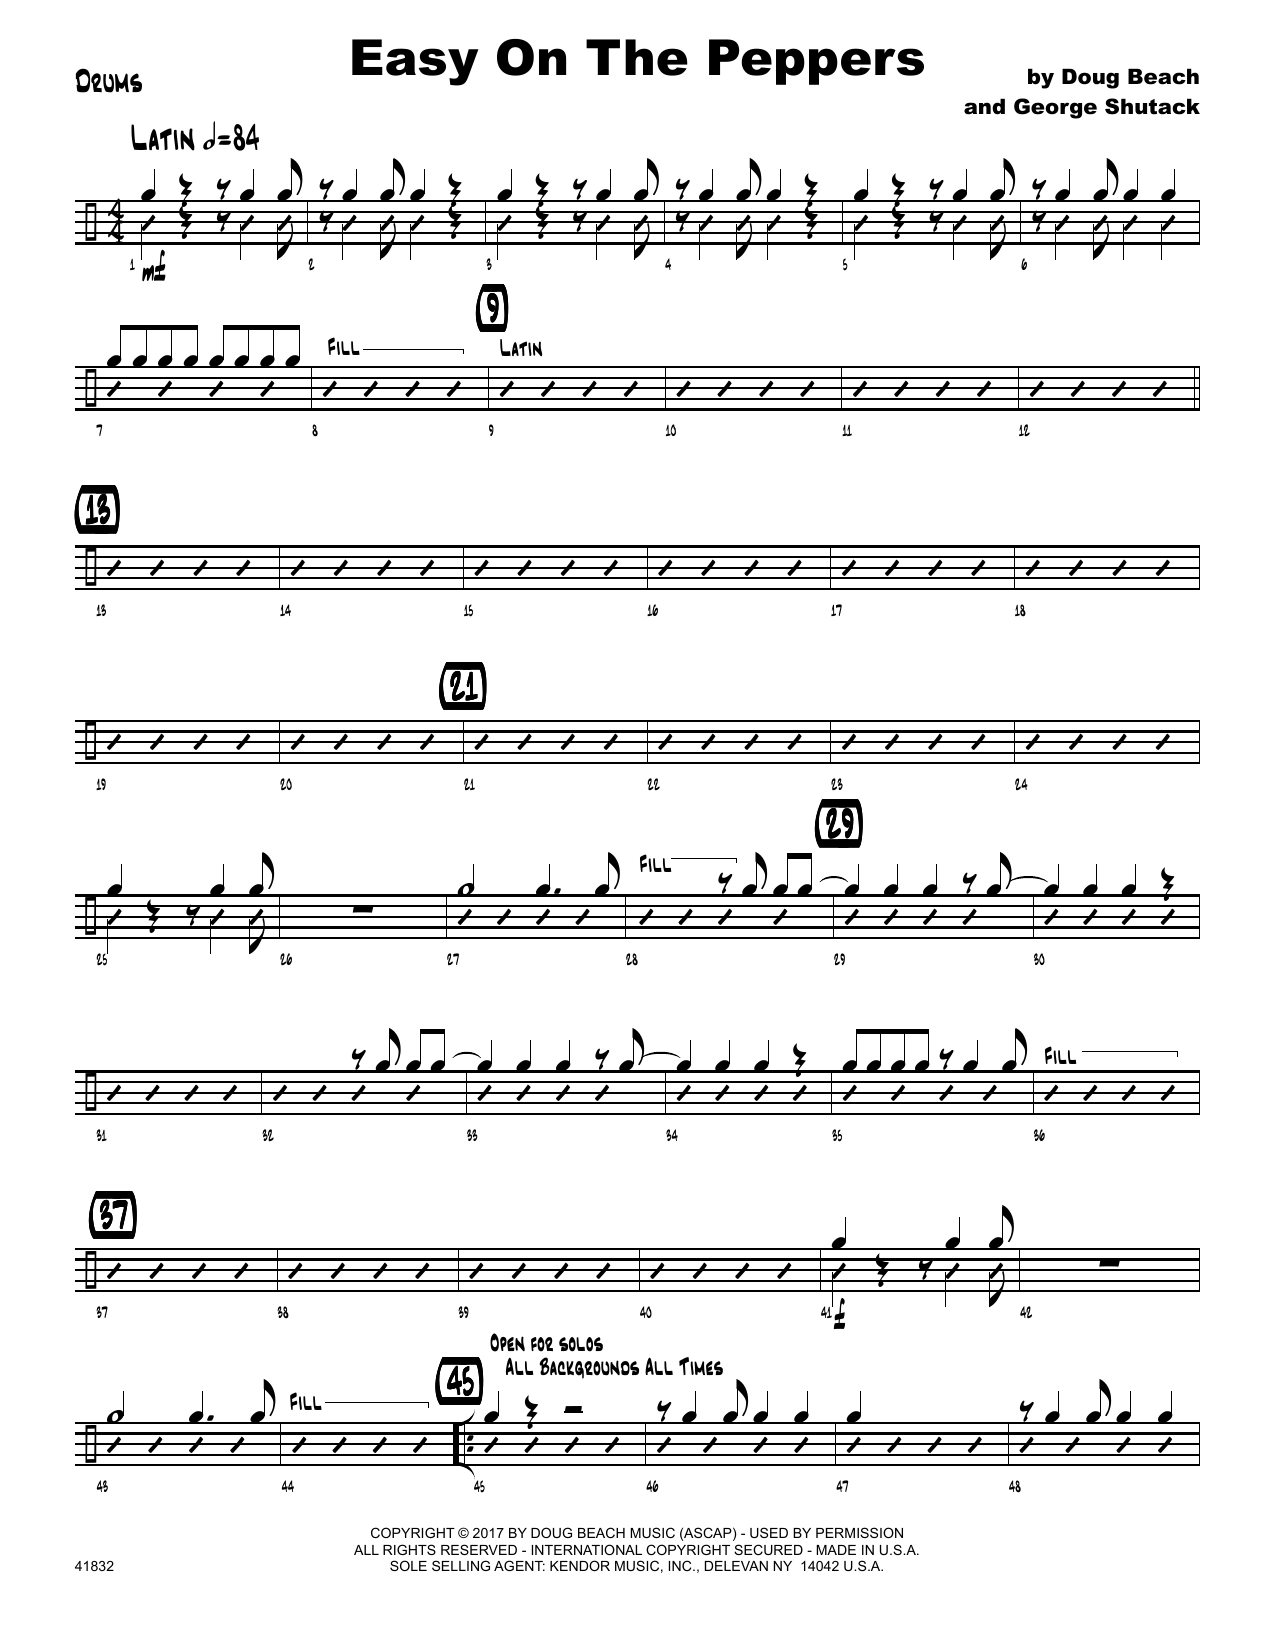 Download Doug Beach & George Shutack Easy On The Peppers - Drum Set Sheet Music